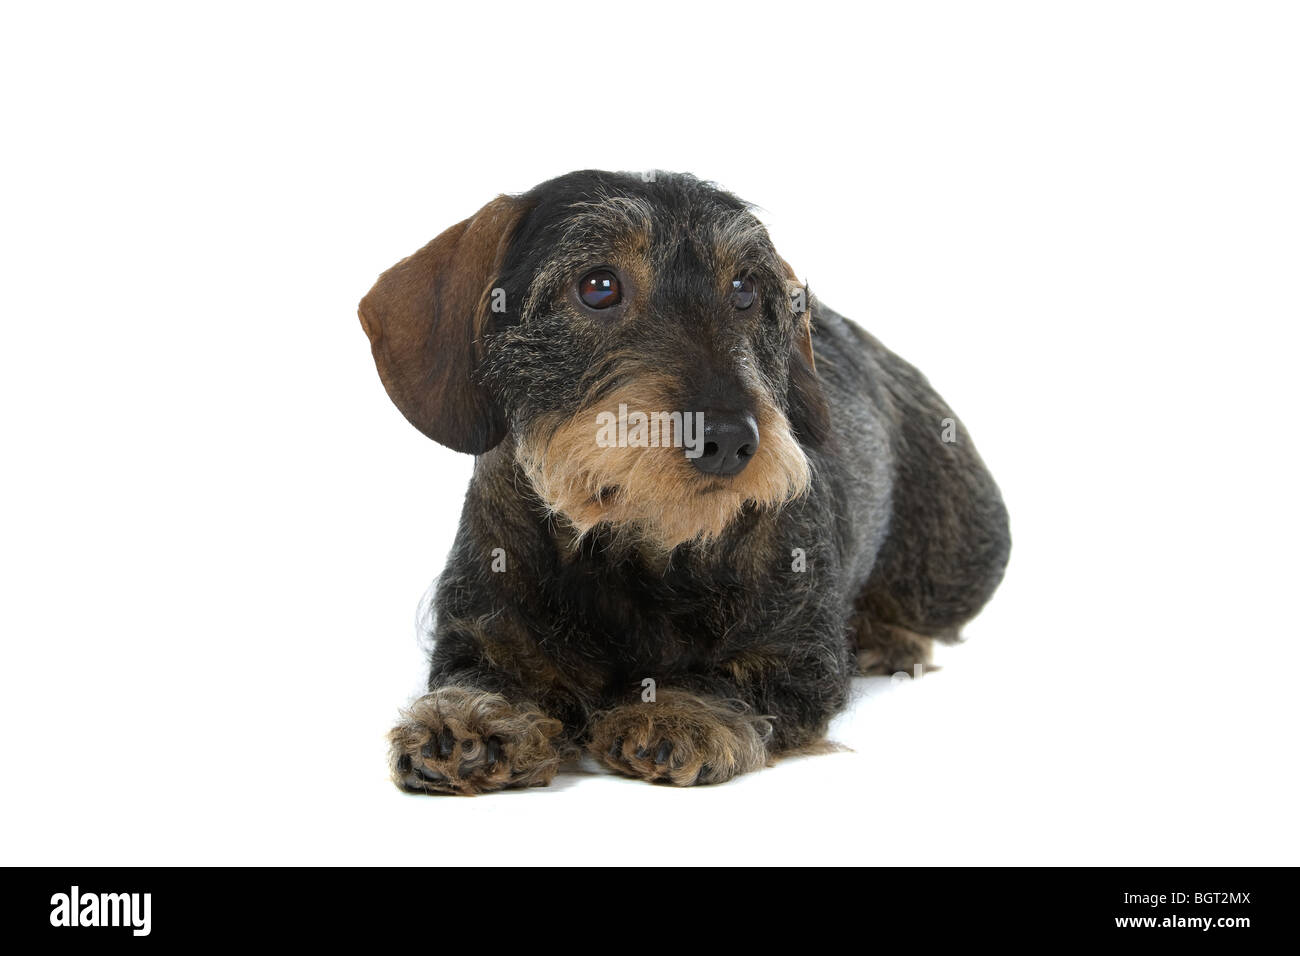 Closeup of cute wire-haired dachshund dog isolated on white background. Stock Photo